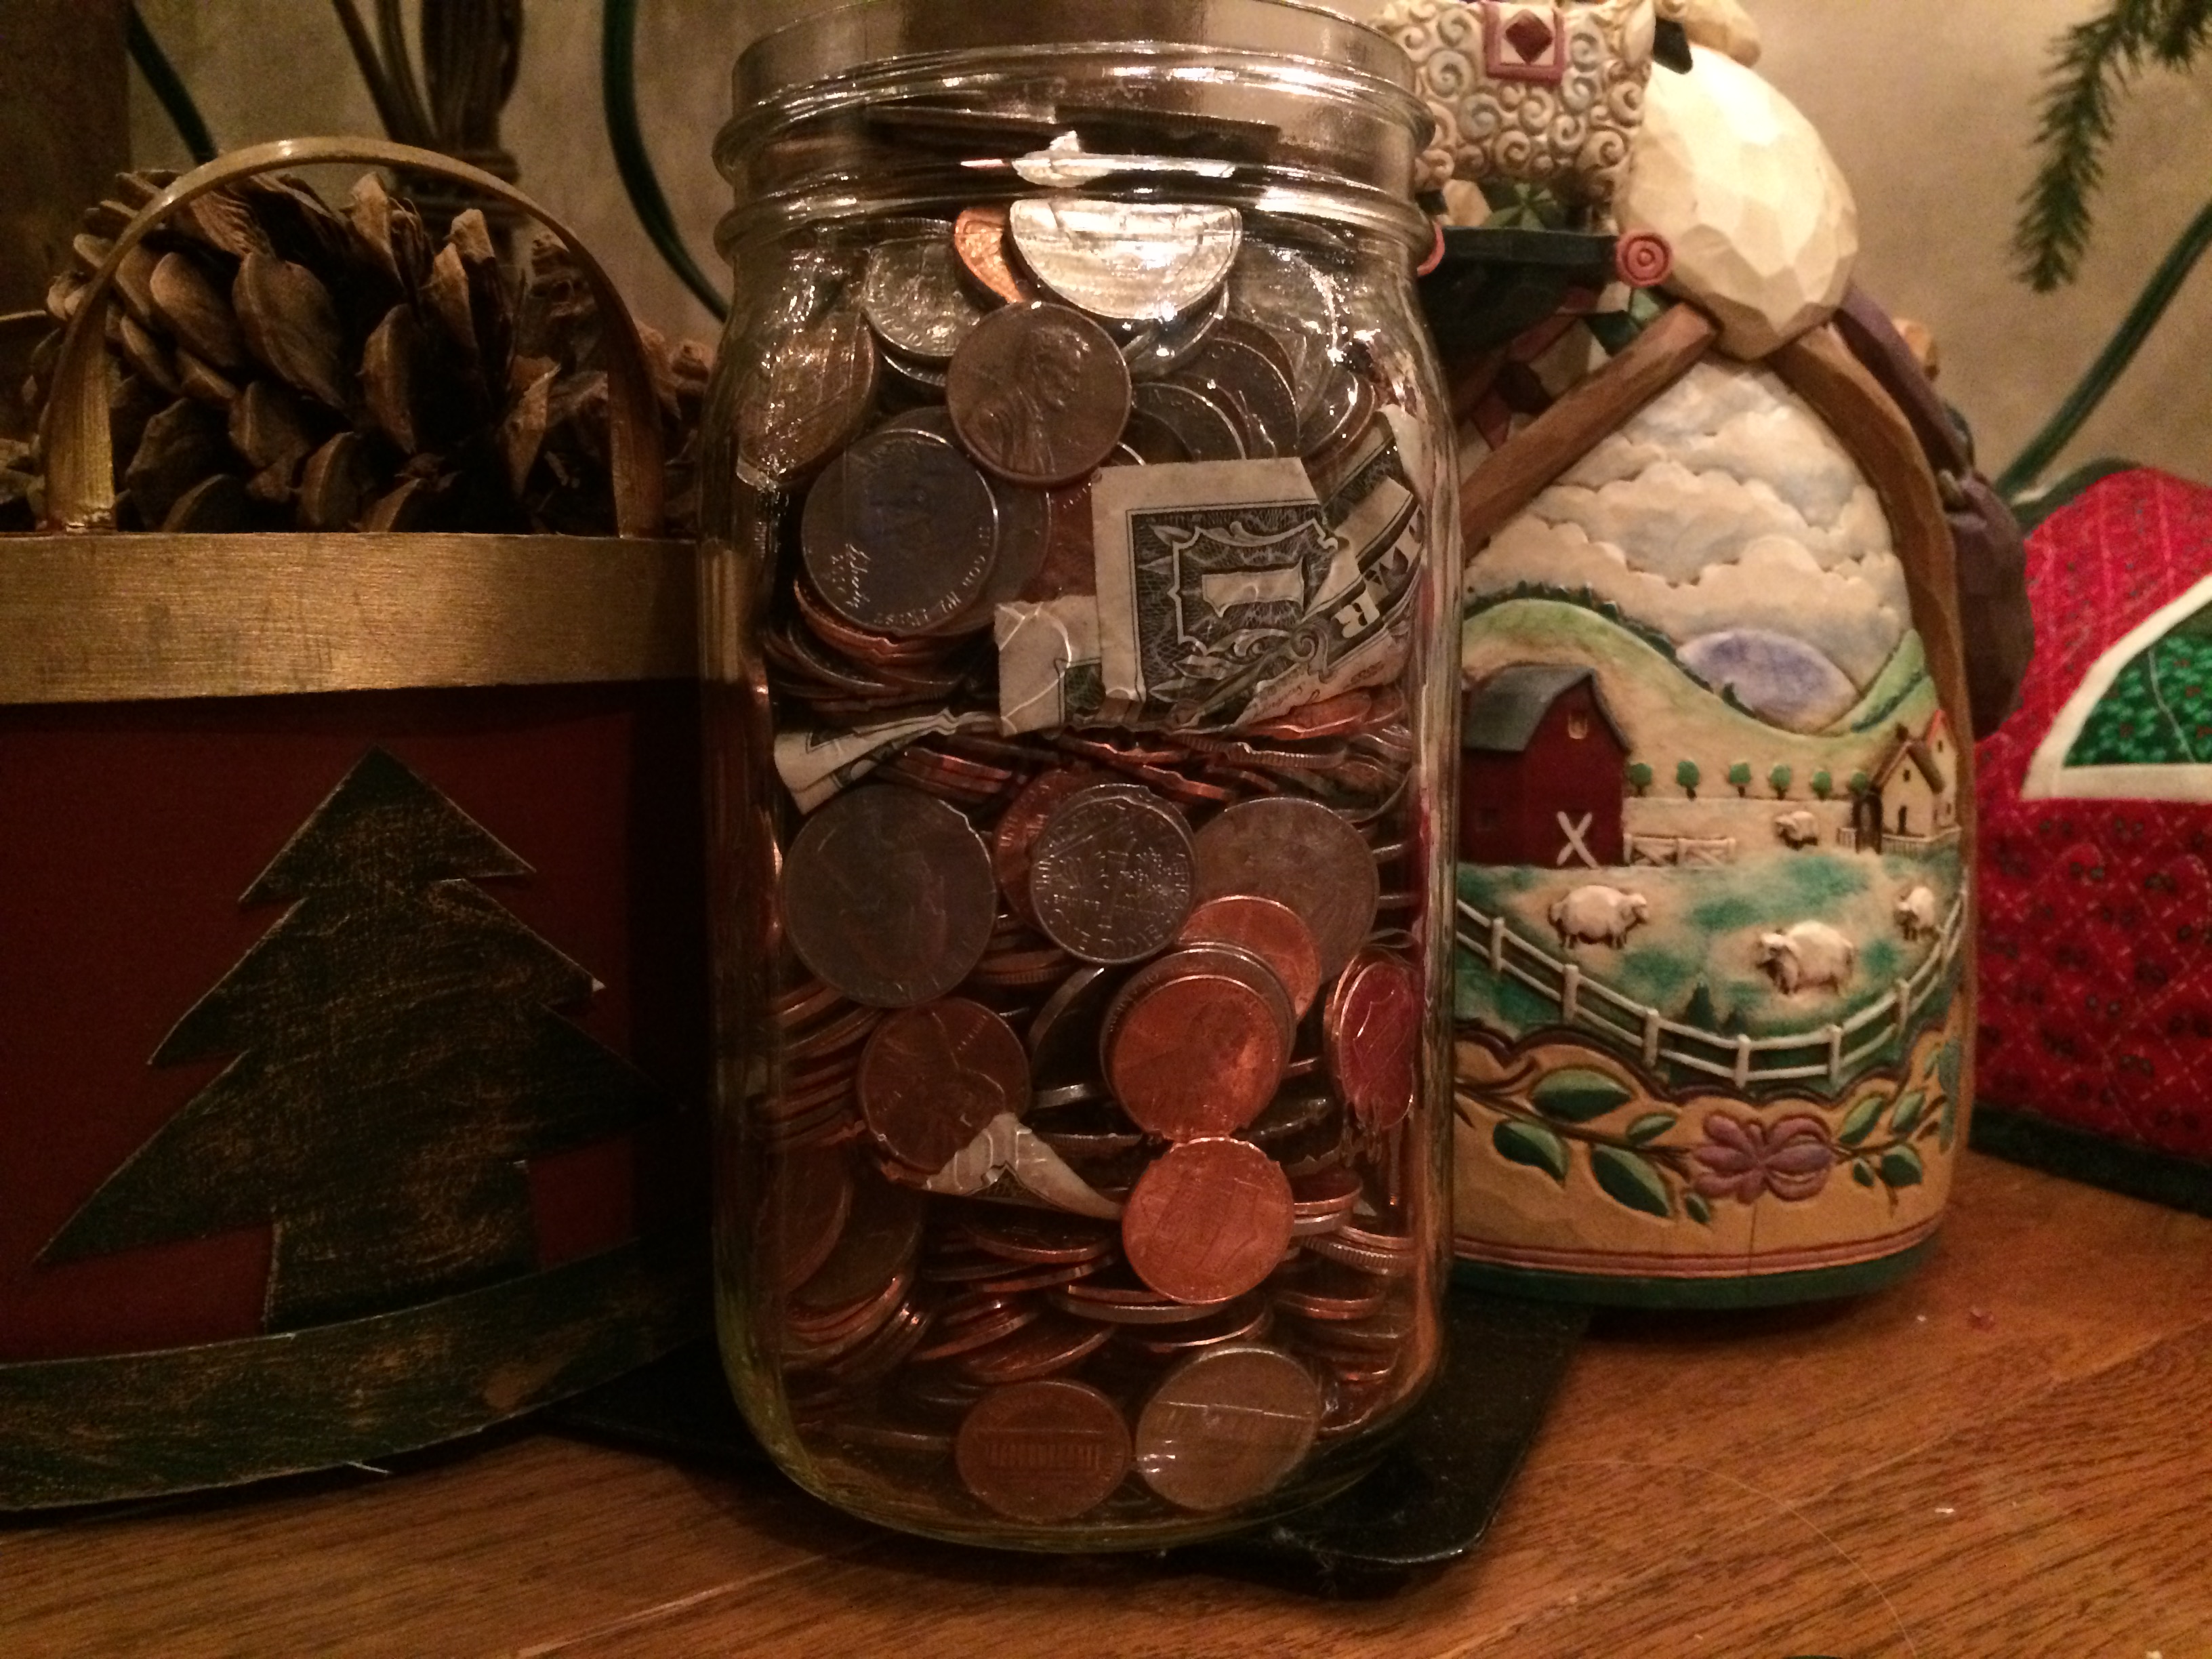 The 3 most inspiring Christmas Jar miracles shared in 2015 — so far